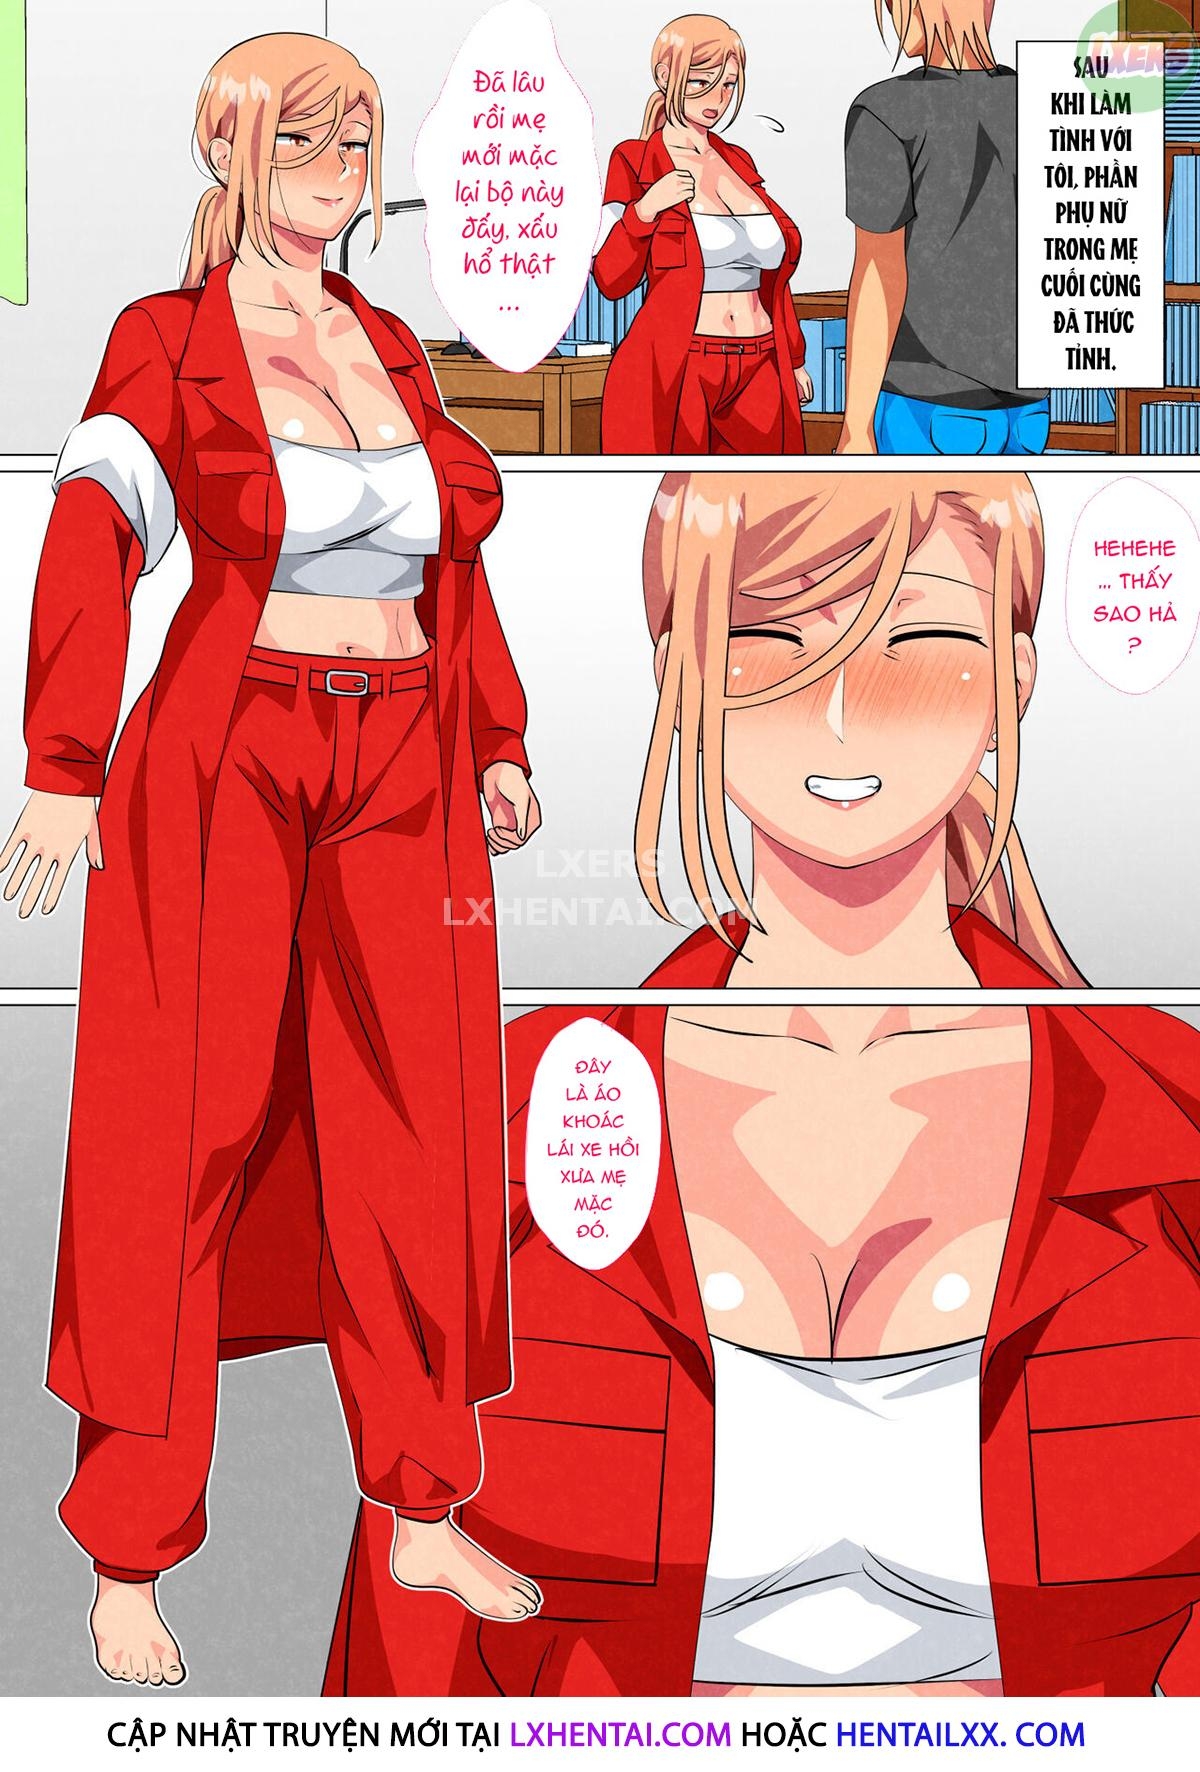 Xem ảnh Son Found His Former Delinquent Mother's Weakness - Chapter 4 - 1651233181692_0 - Hentai24h.Tv